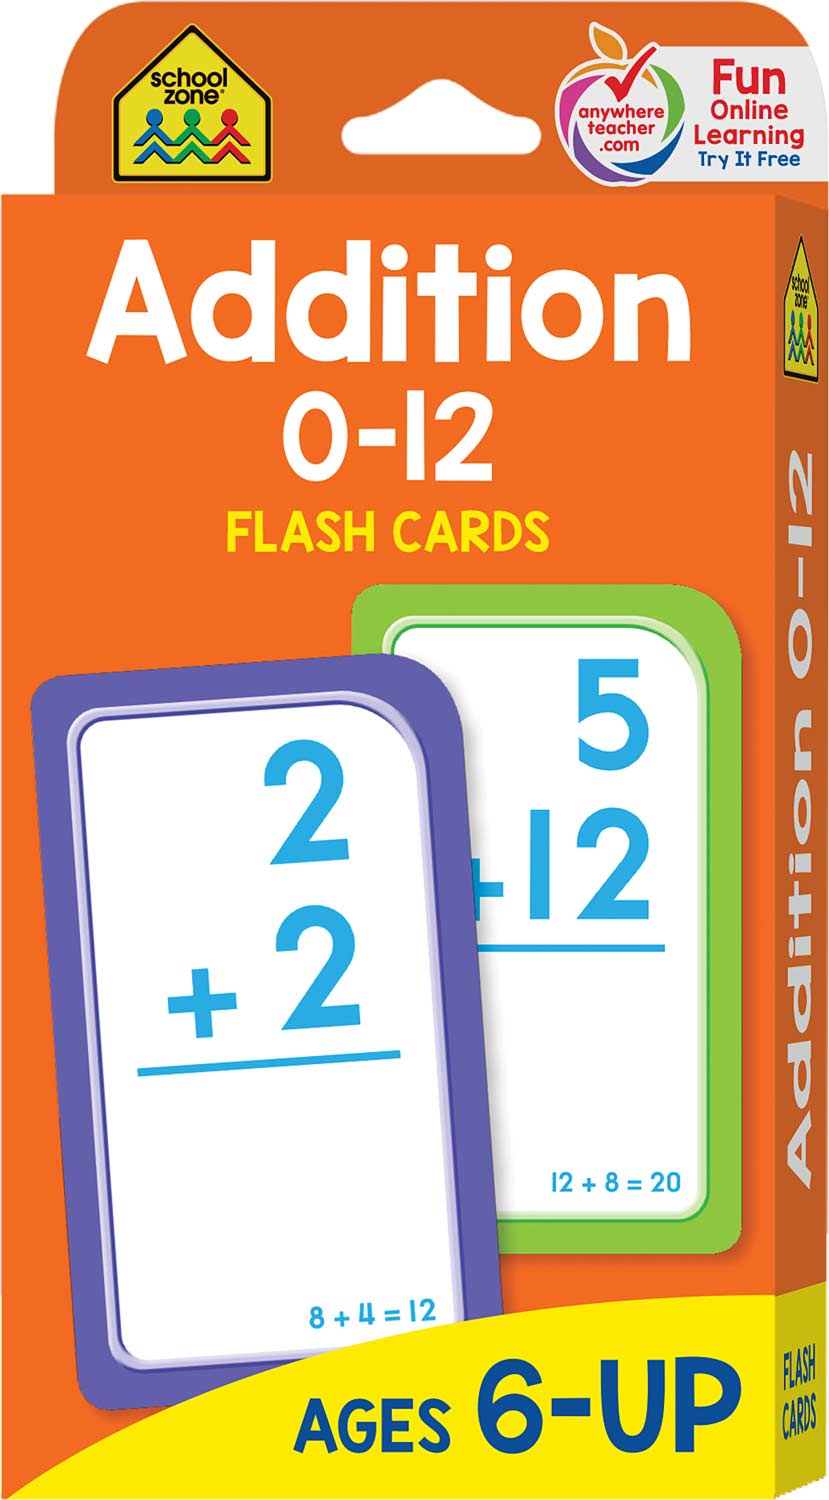 Addition Flash Cards | Math Flash Cards by School Zone - Raff and Friends